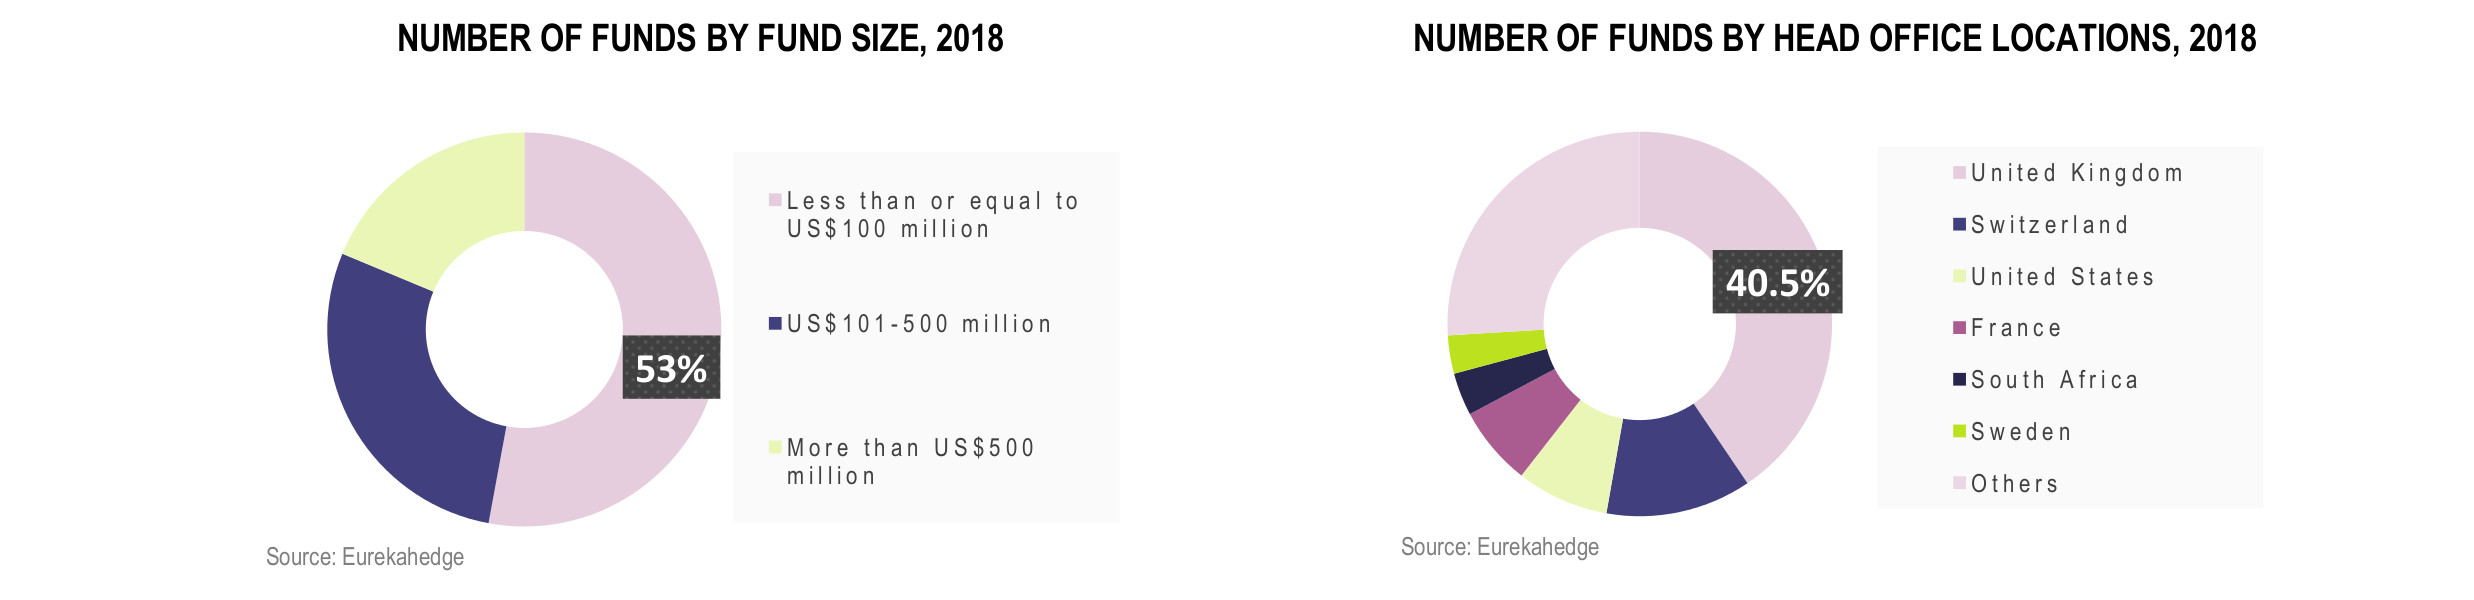 European Hedge Funds Infographic December 2018 - number of funds by fund size, number of funds by head office locations